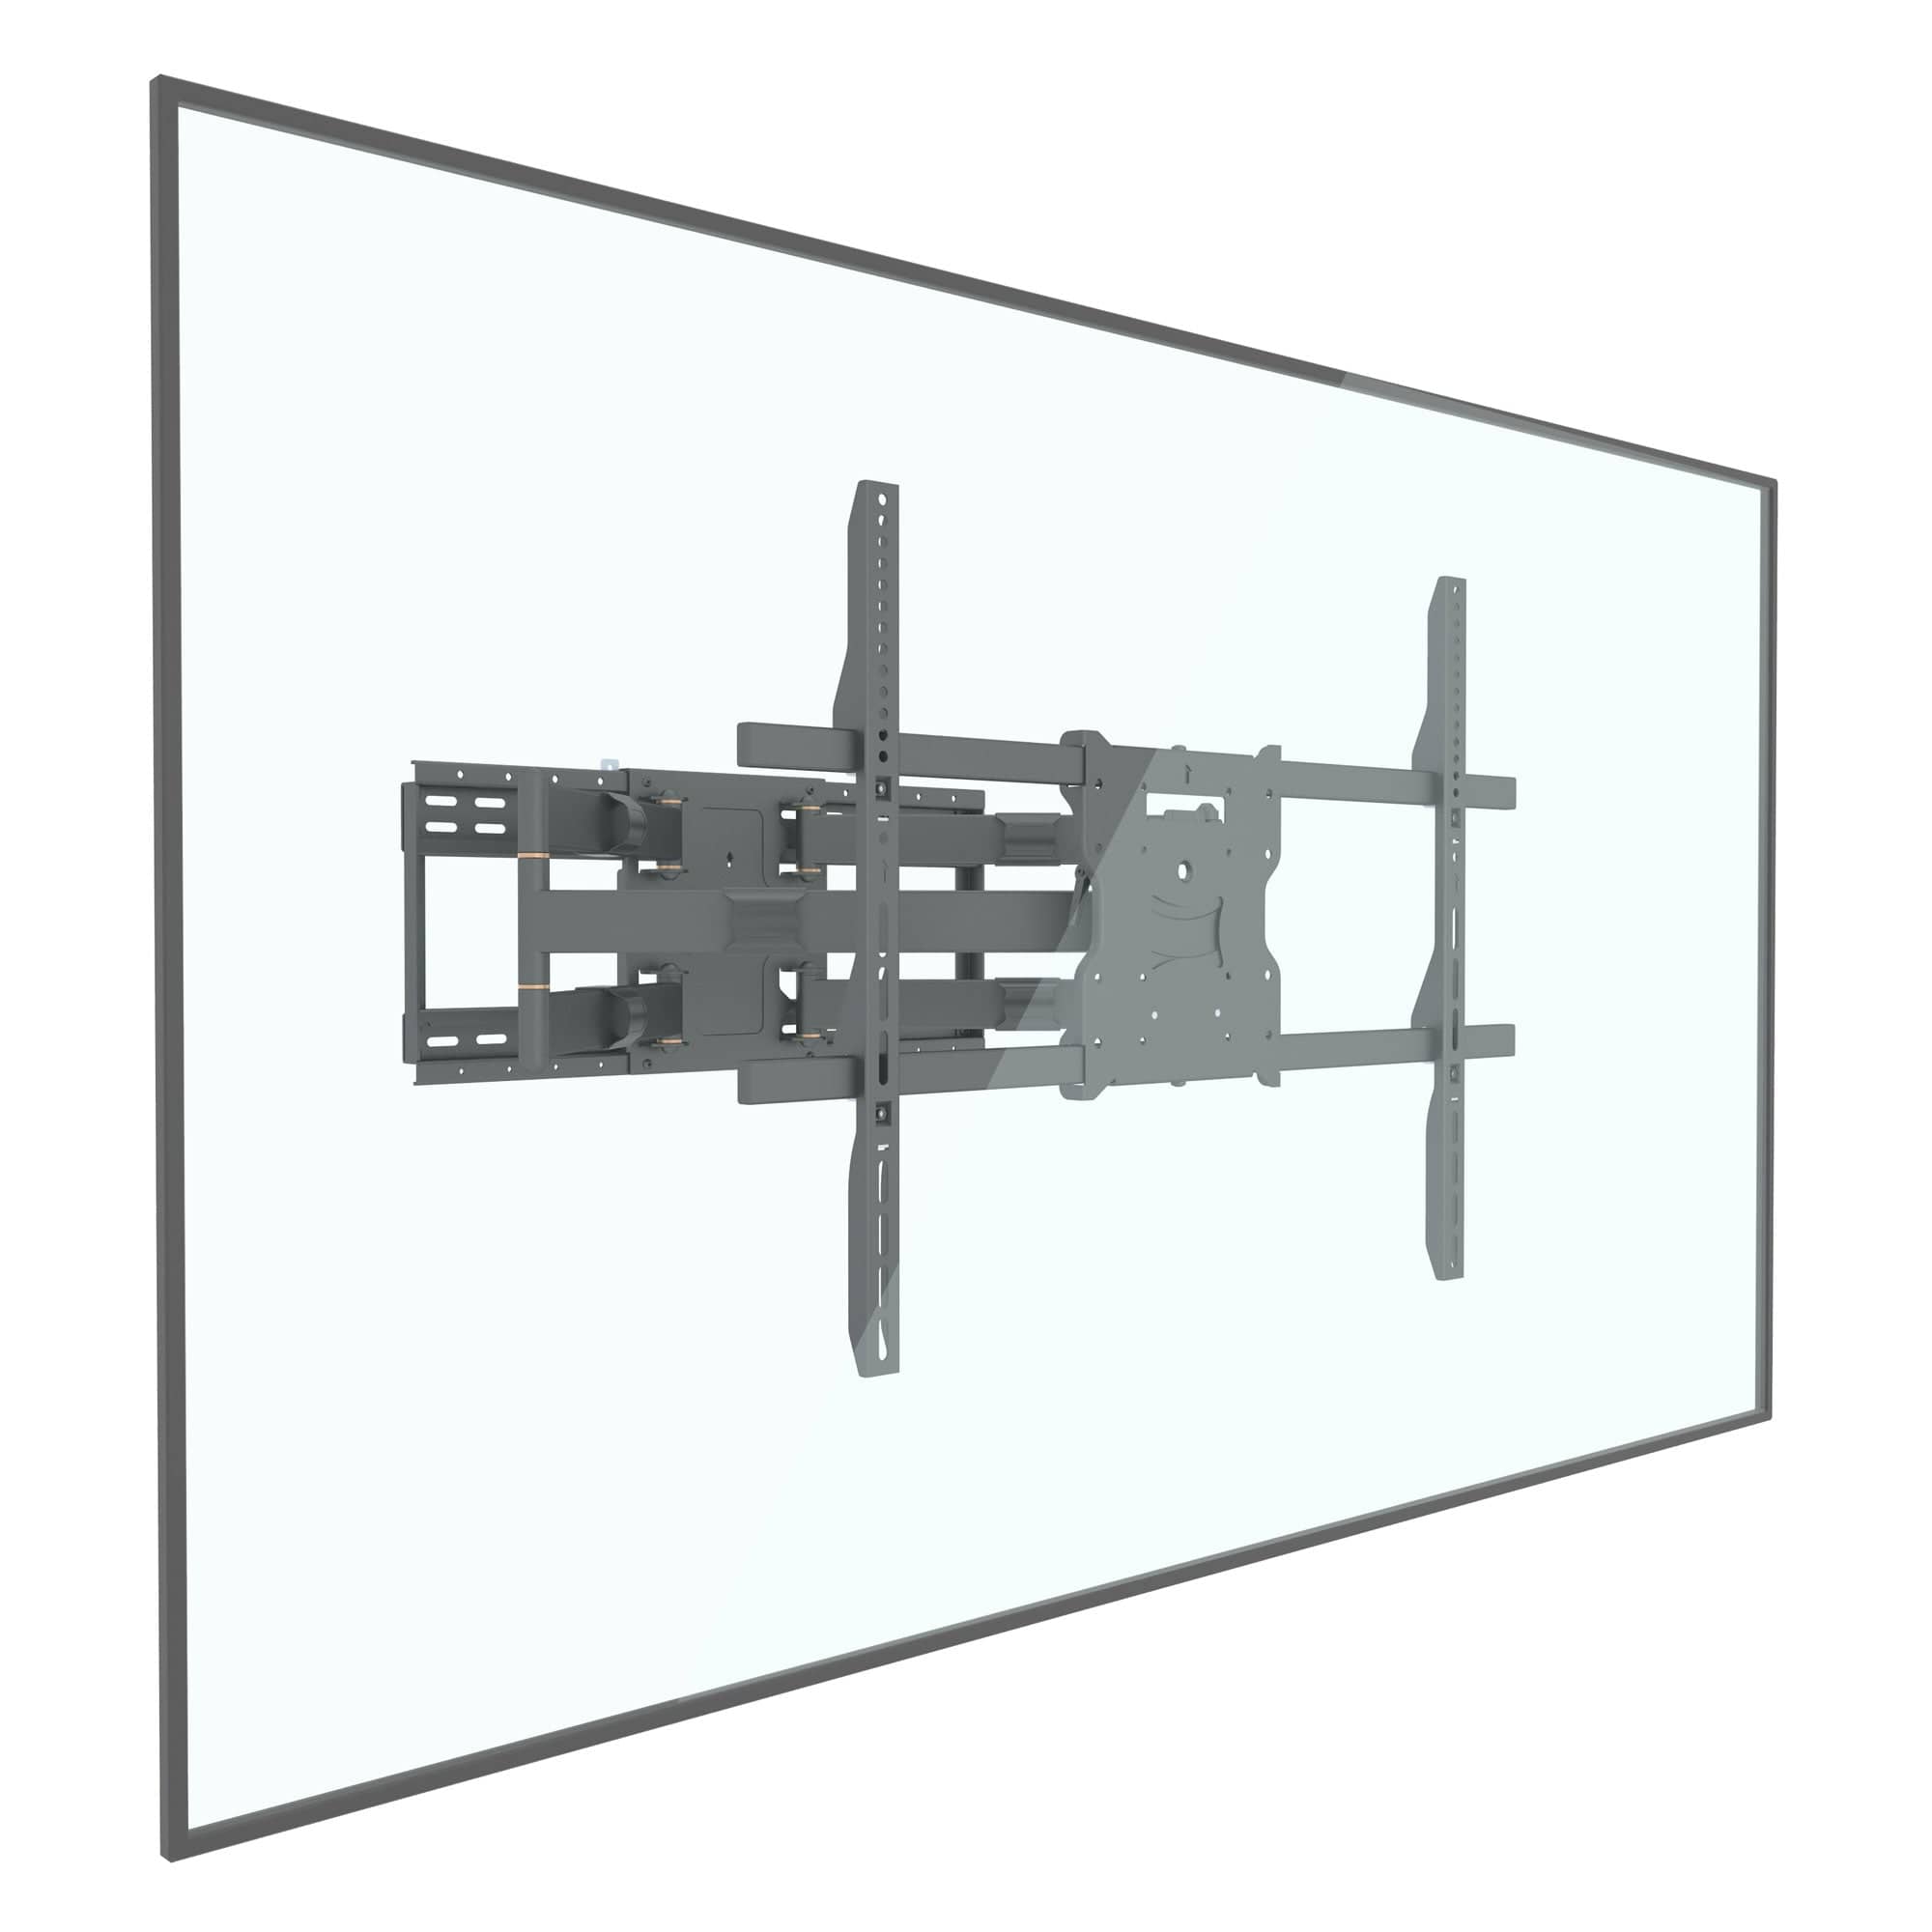 The BEAST Heavy-Duty Dual-Arm Articulating Wall Mount with Extra-Long Extension